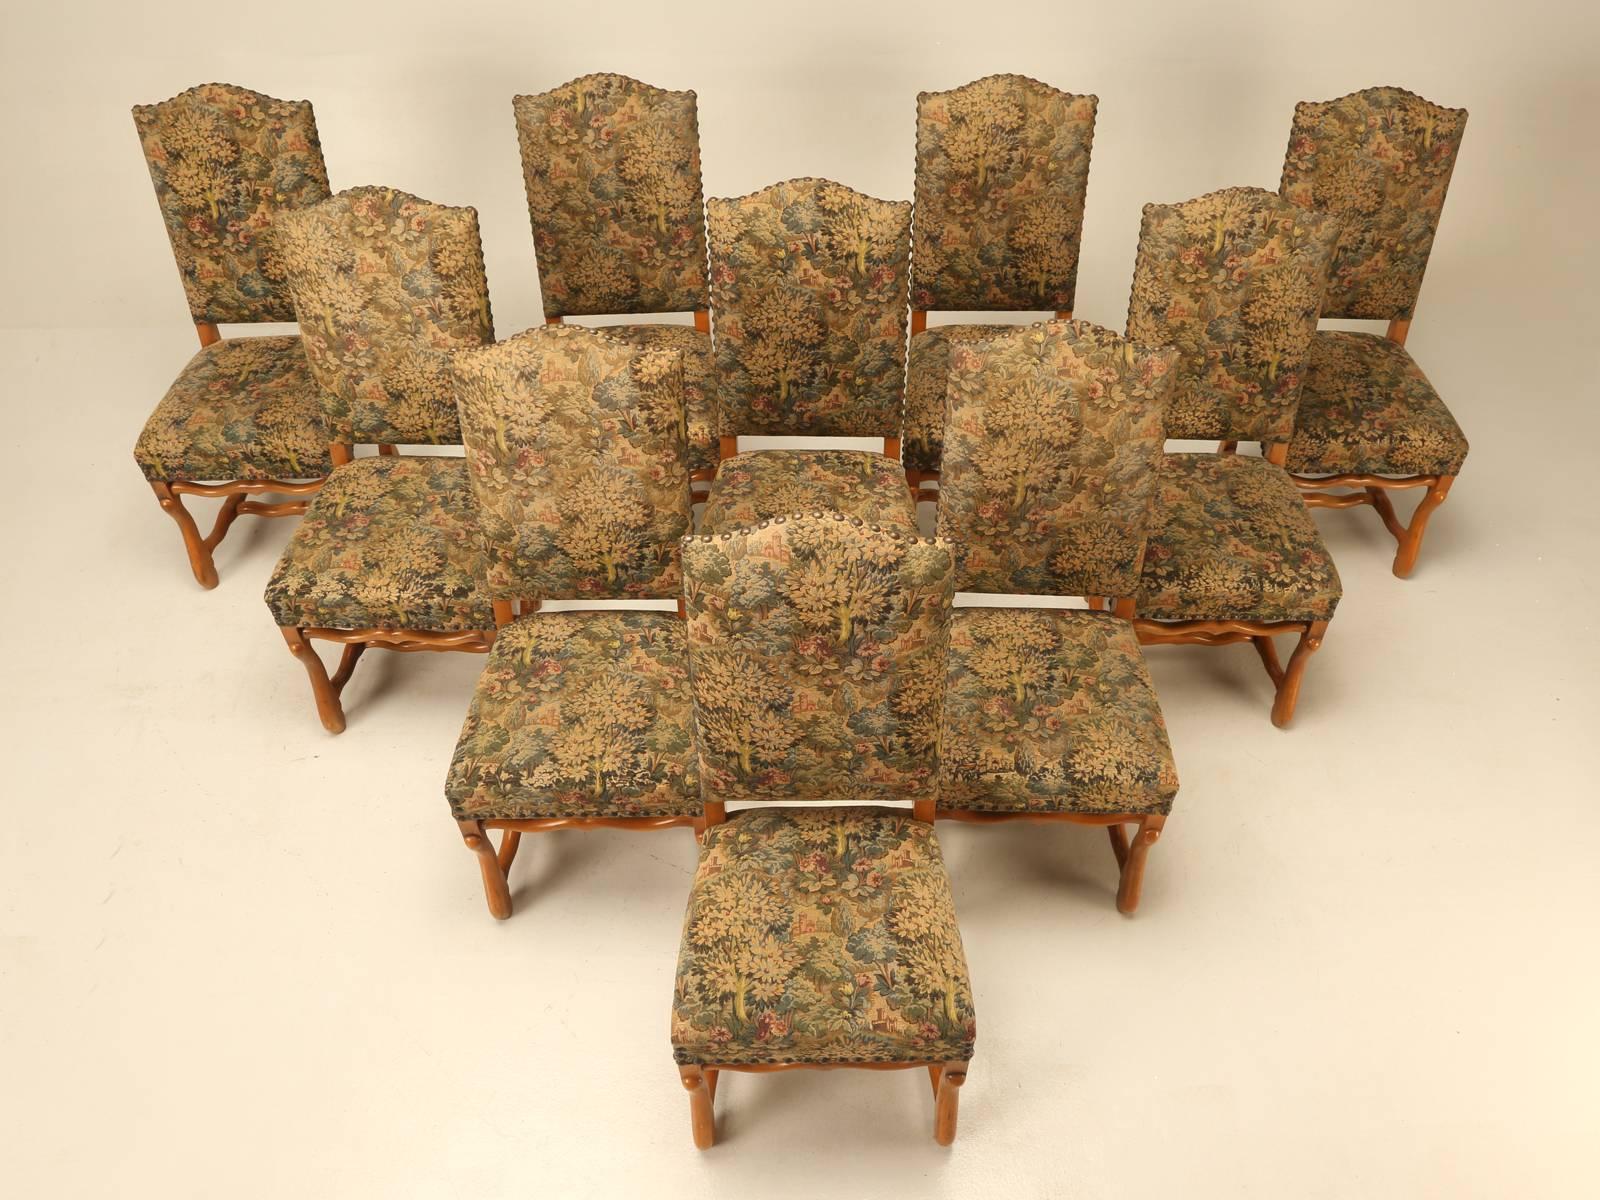 French vintage set of ten (10) dining chairs whose fabric needs replacing, but which are structurally very sound and priced accordingly. The style is typically called “os de mouton”, referring to the shape of the stretchers that are similar to a